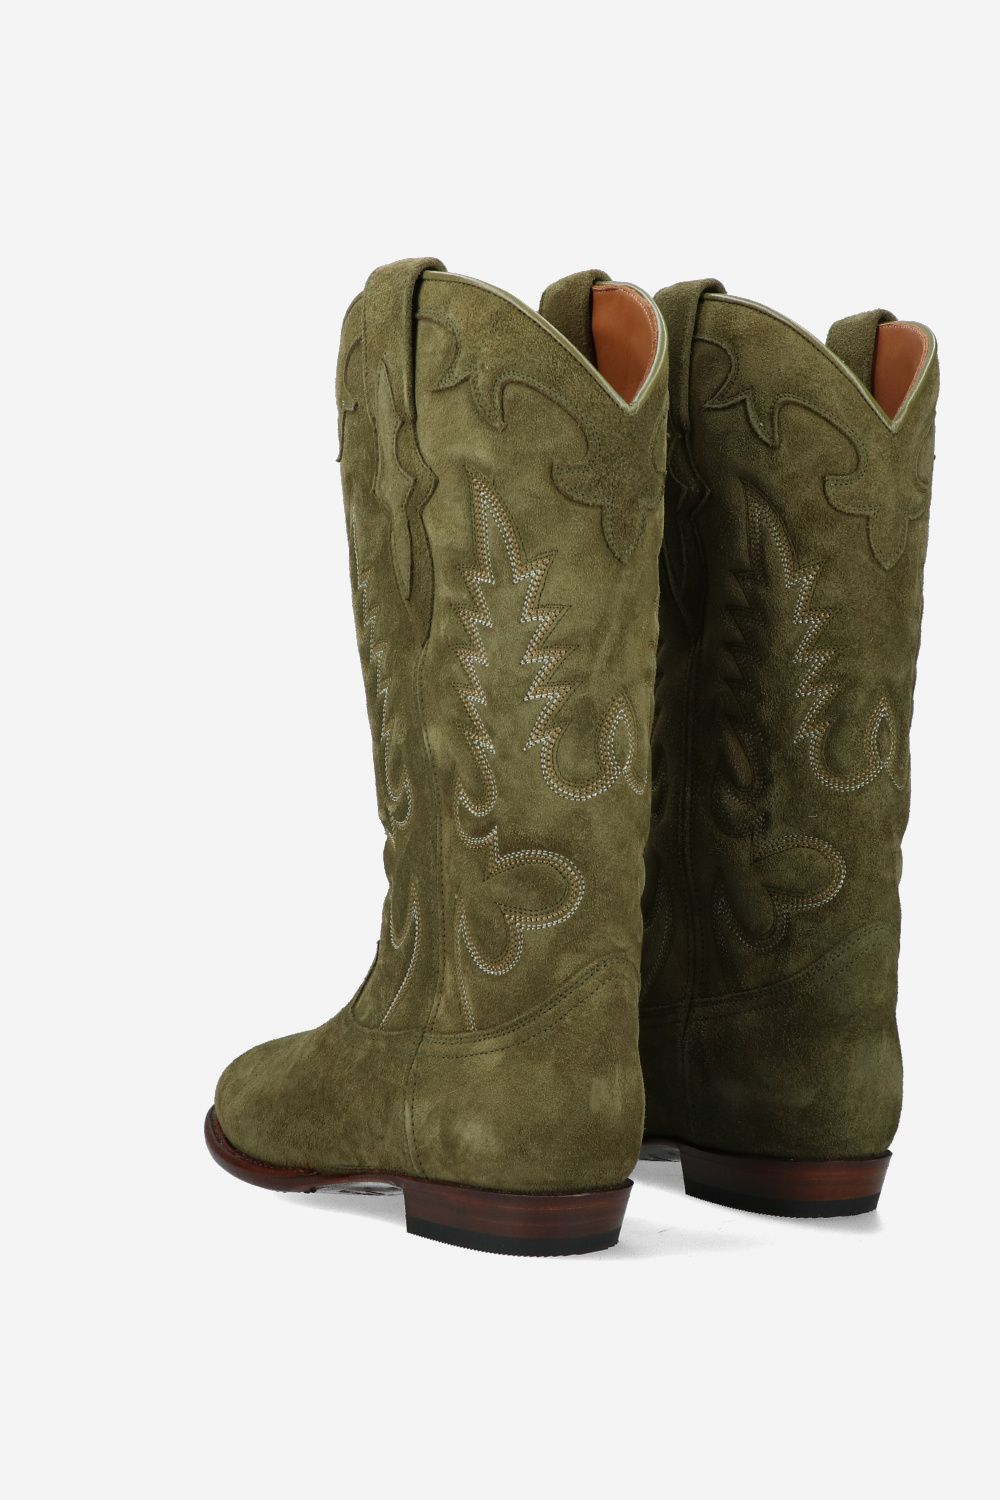 Shiloh Heritage Boots Green